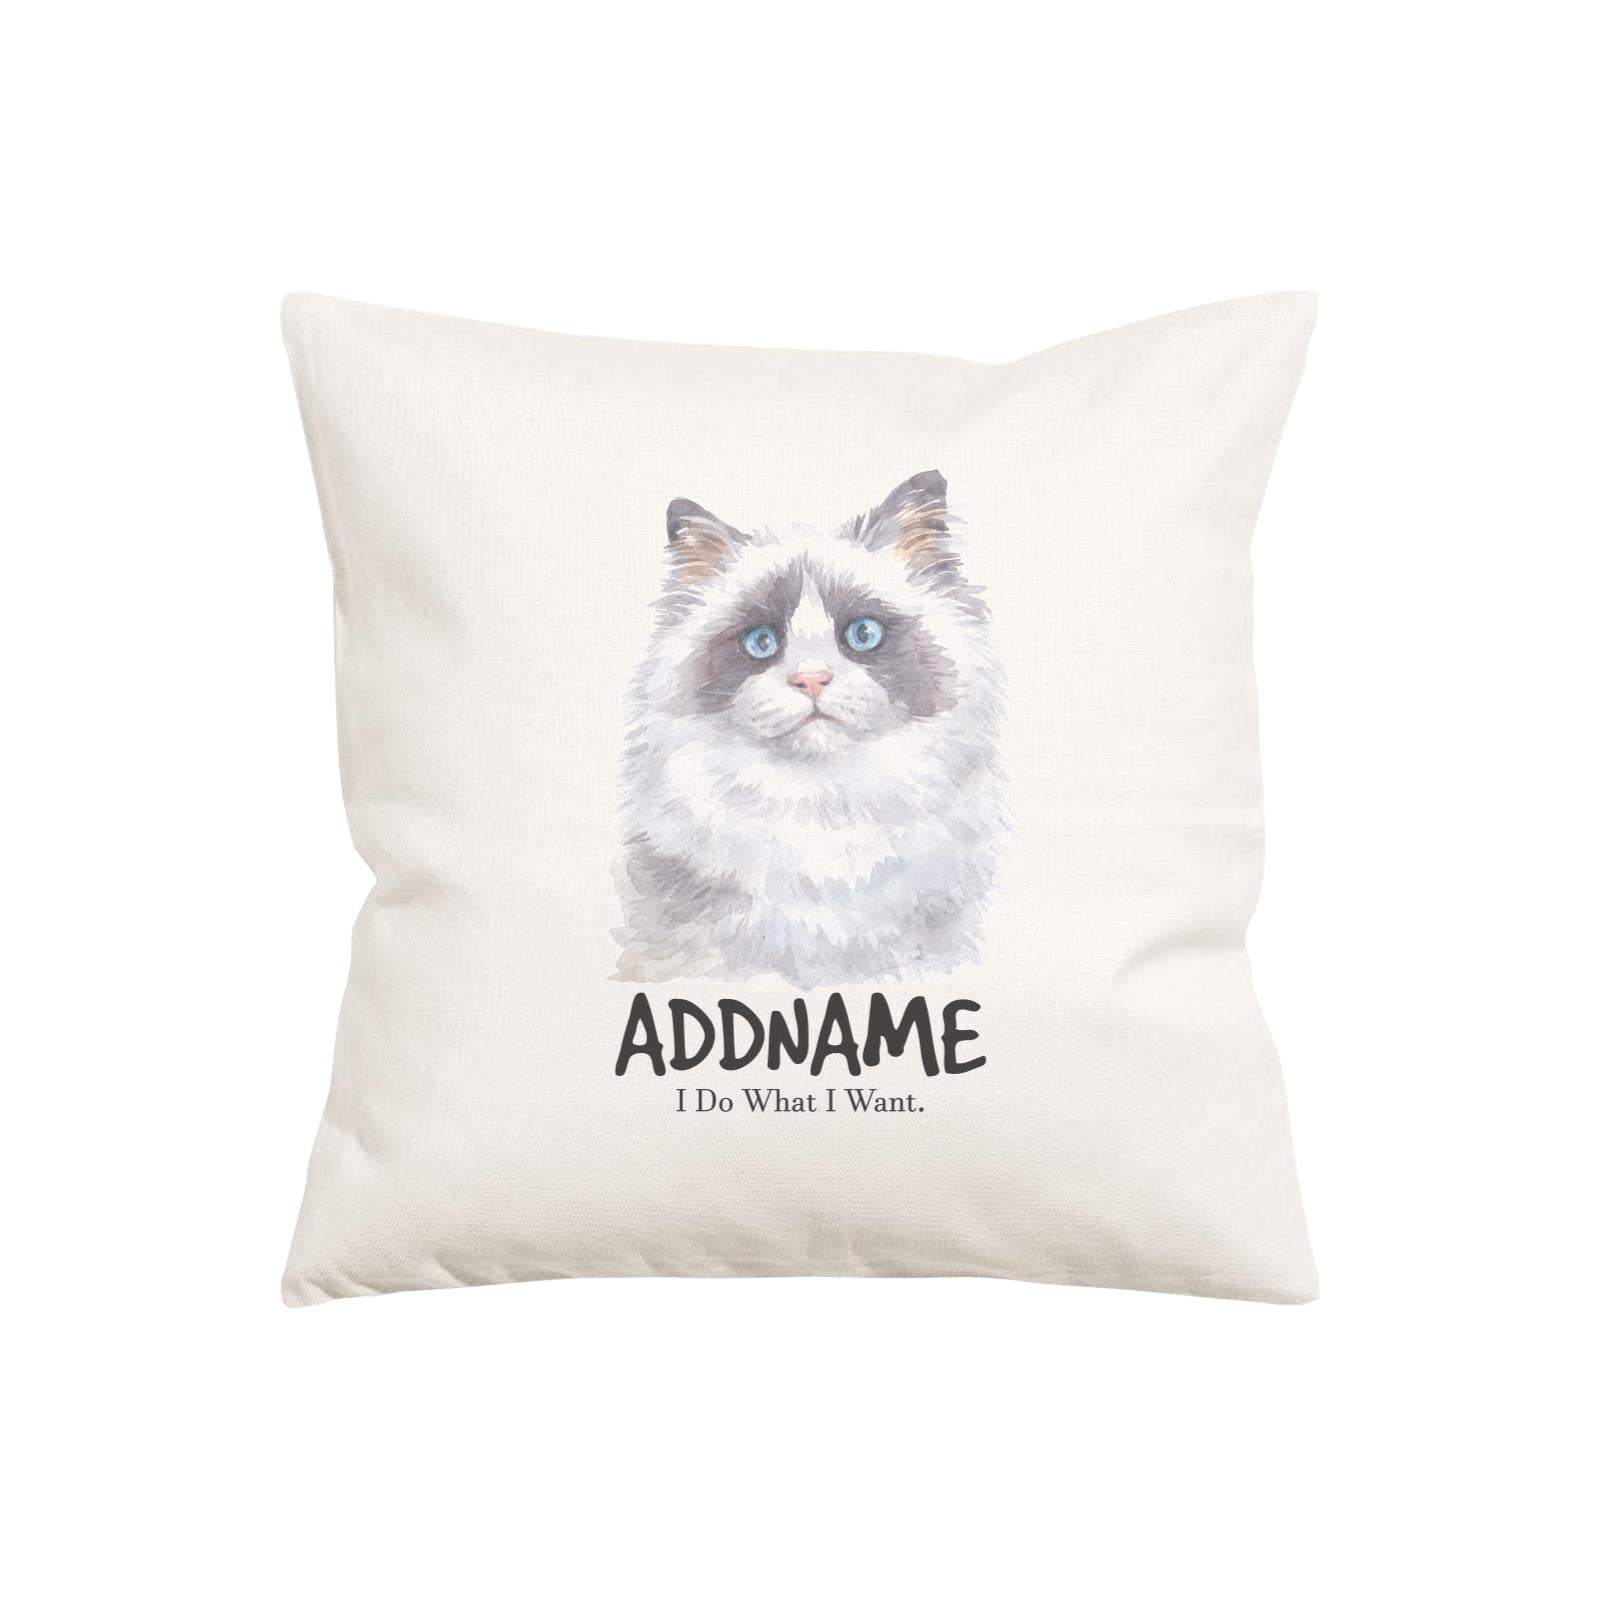 Watercolor Cat Series Ragdoll Cat I Do What I Want Addname Pillow Cushion